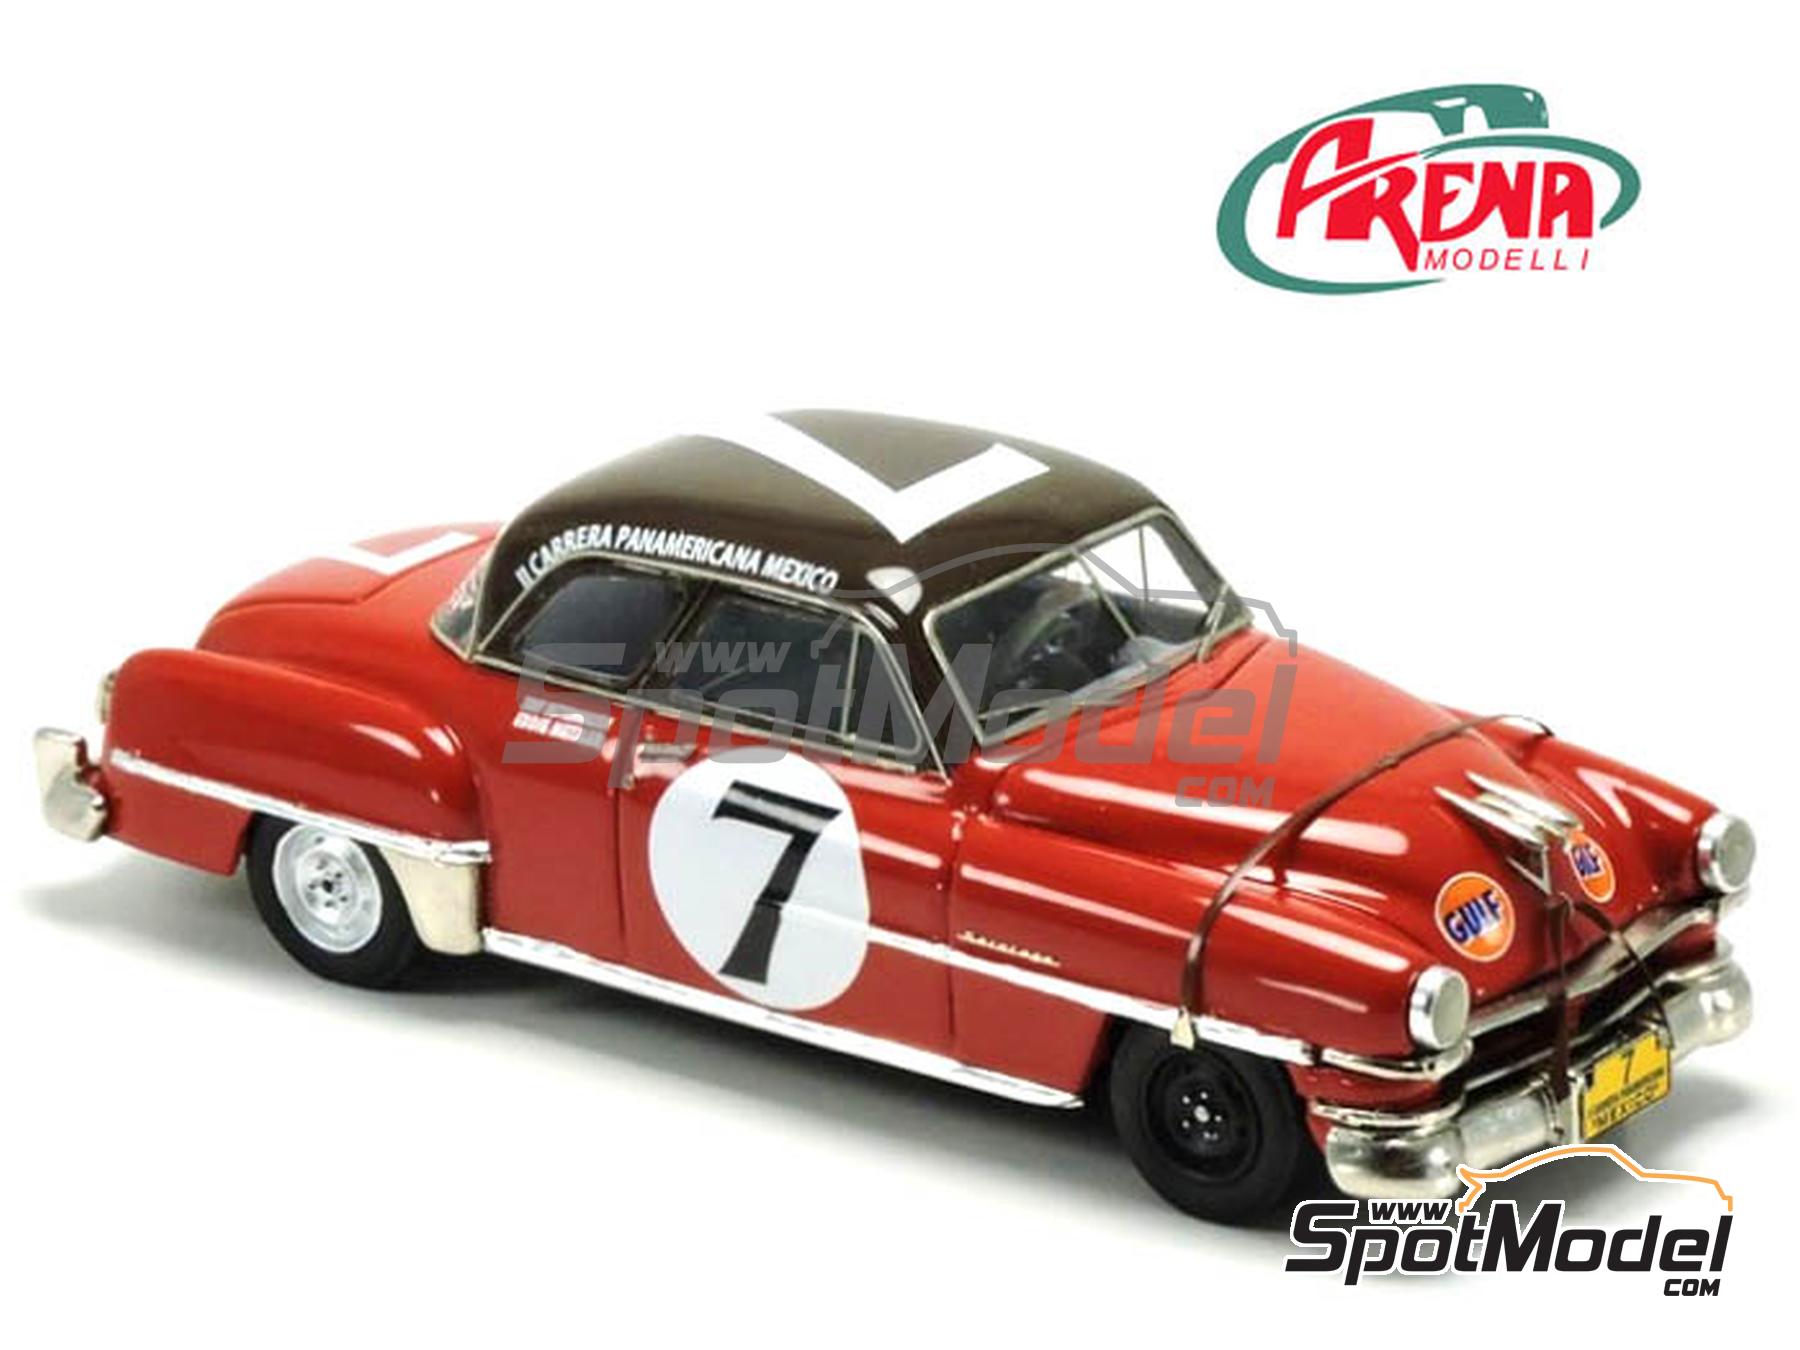 Chrysler Saratoga sponsored by Gulf - Carrera Panamericana 1951. Car scale  model kit in 1/43 scale manufactured by Arena Modelli (ref. ARE933)